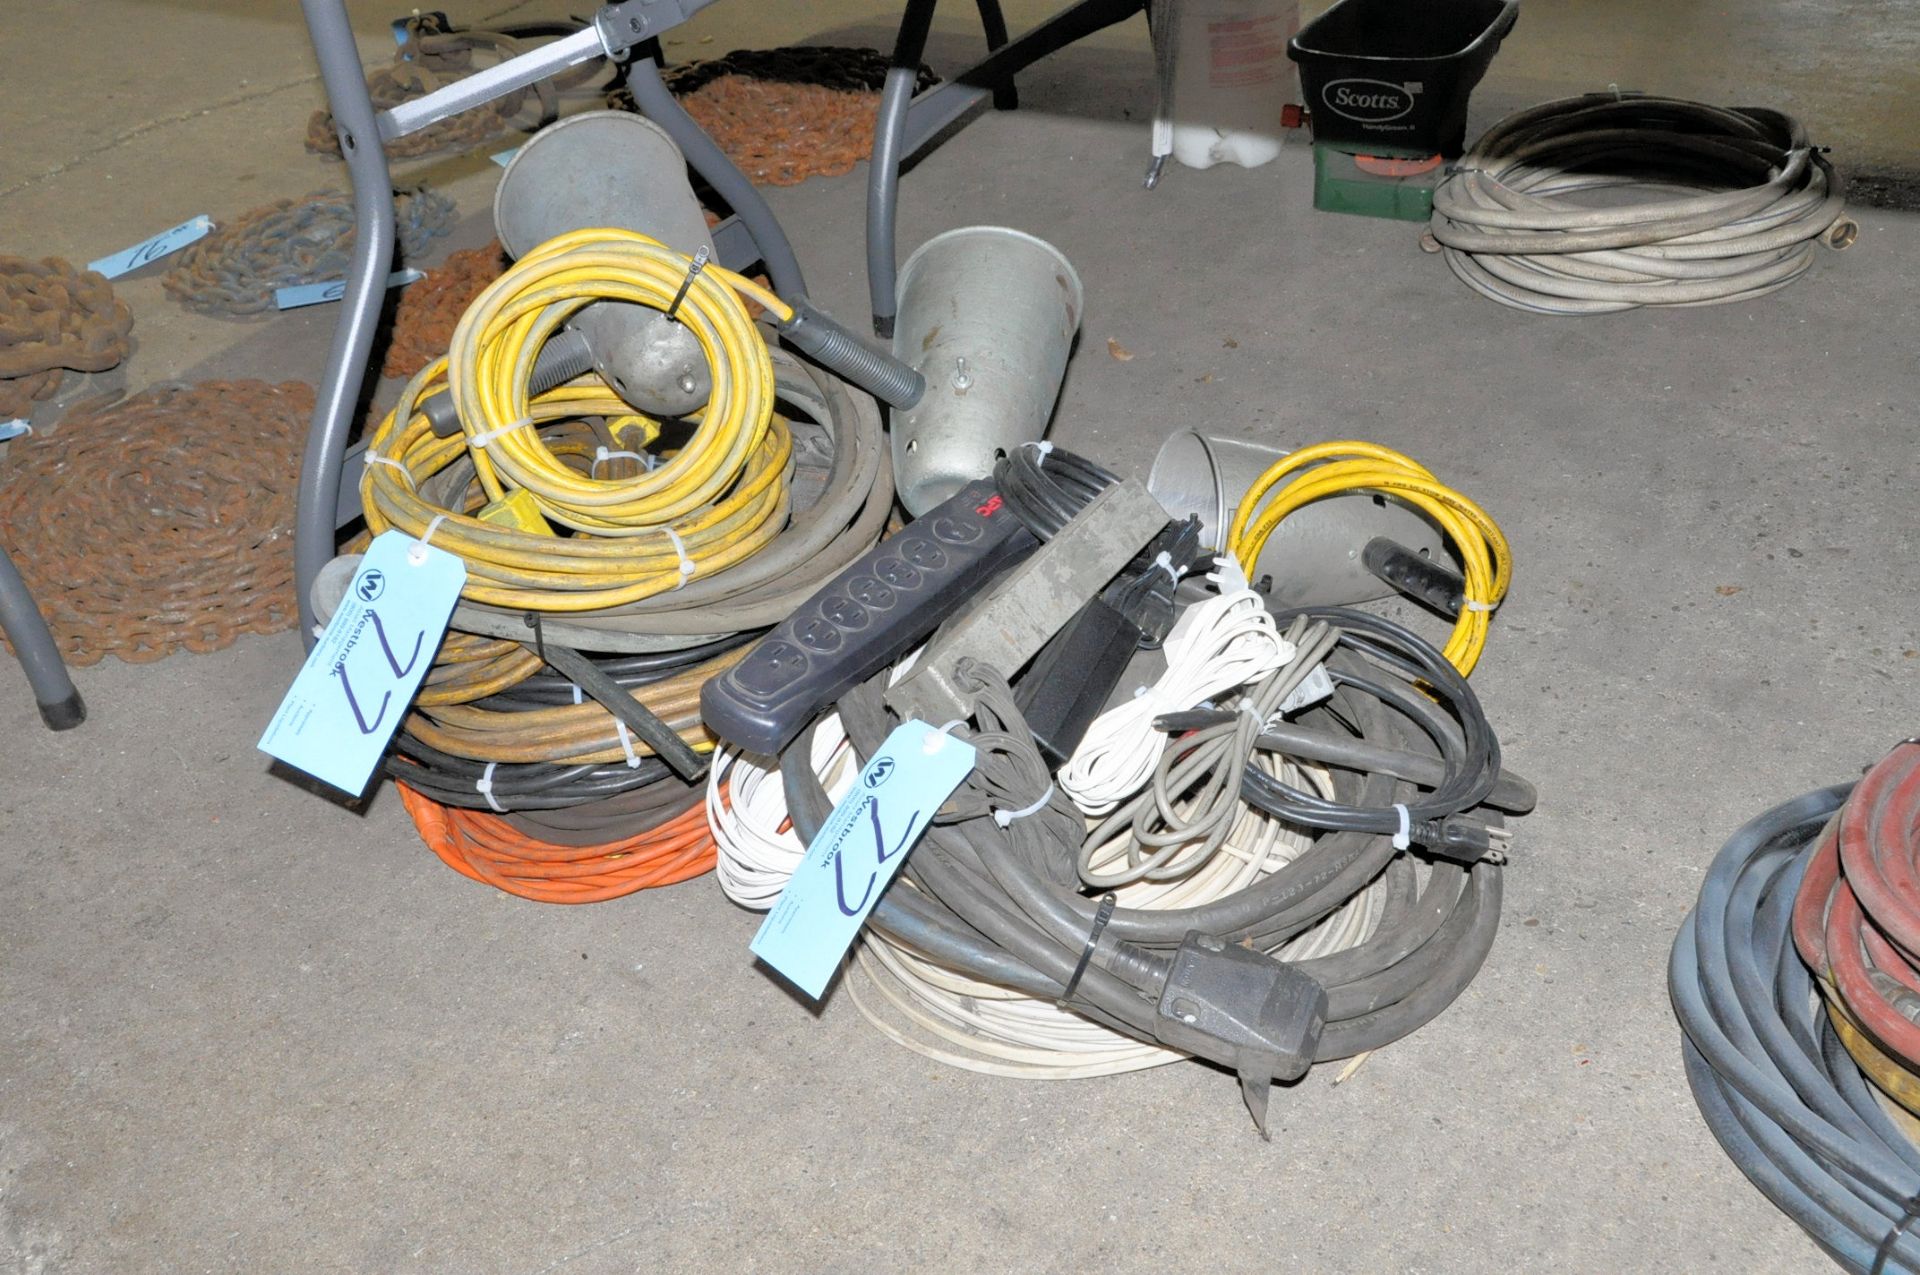 Lot-Extension Cords, Power Strips and Light on Floor Under (1) Table